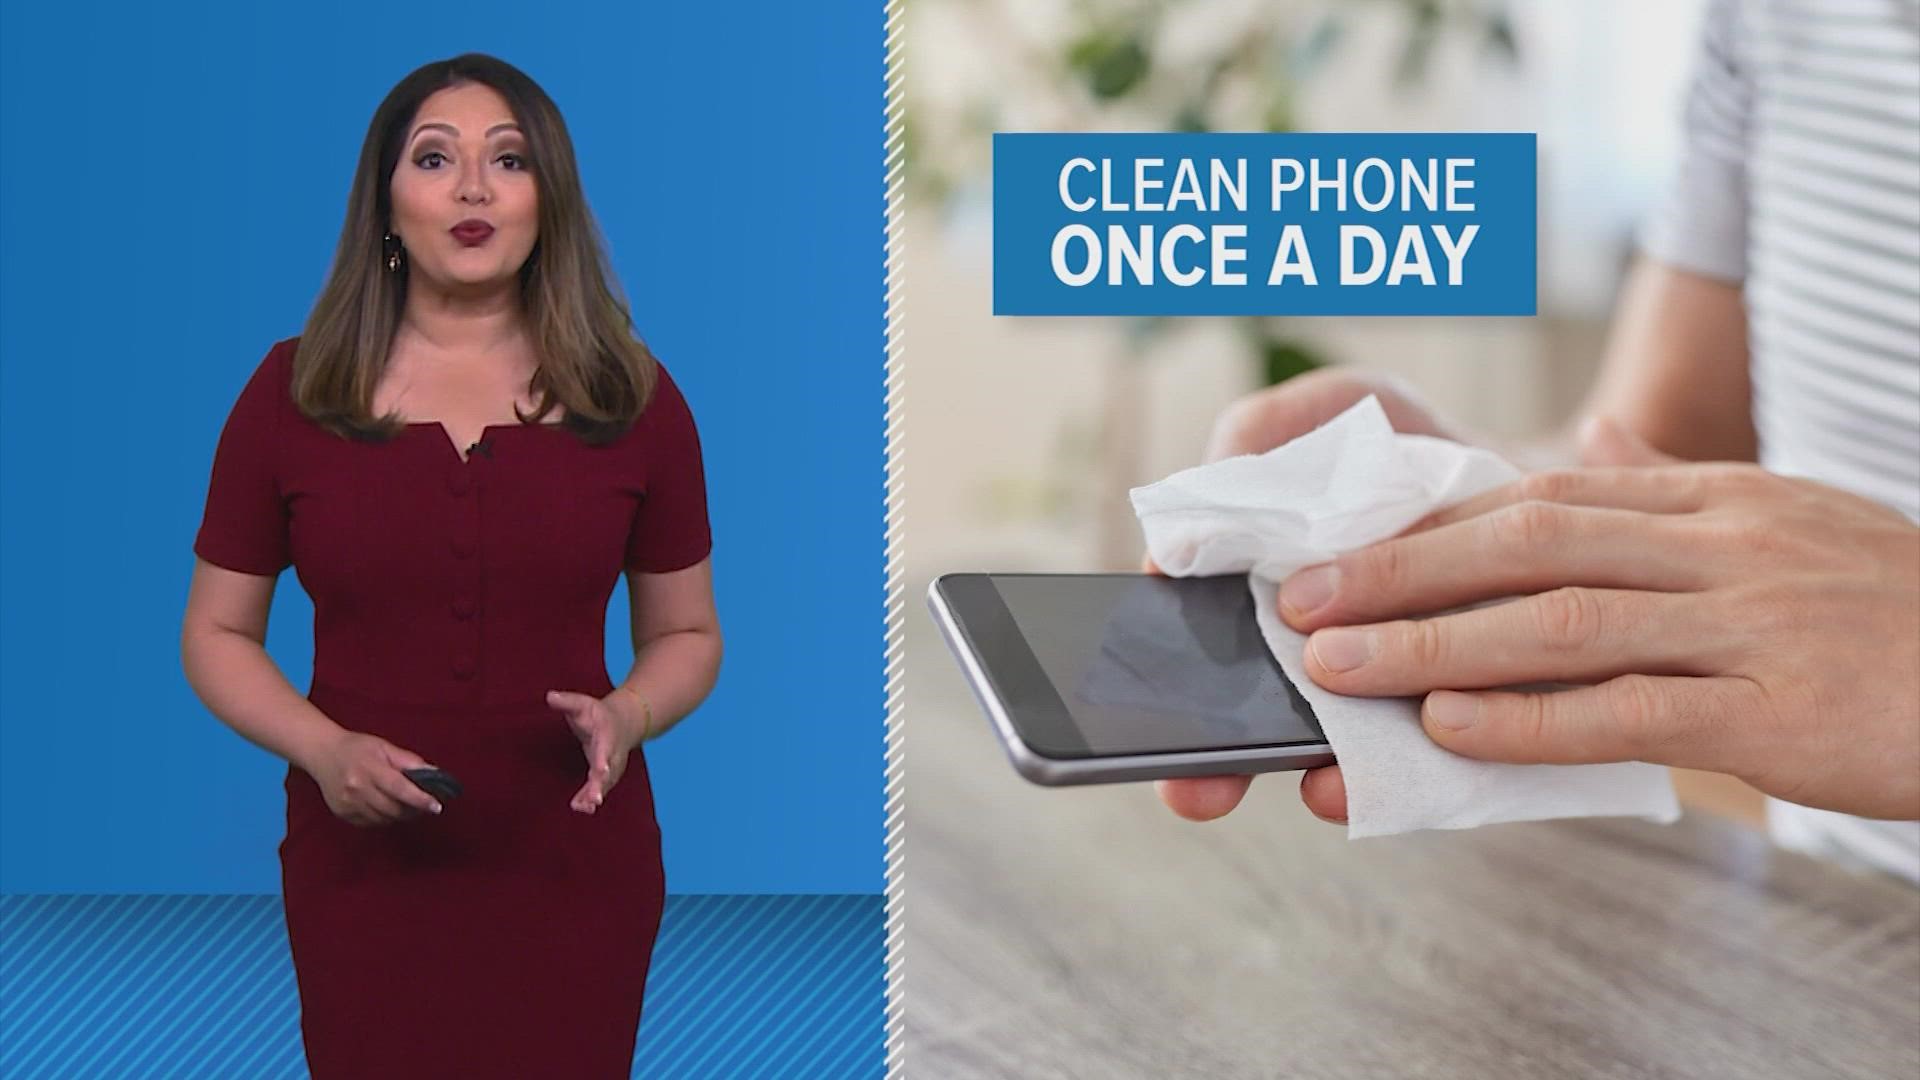 There is a lot of gross stuff living on your phone, here’s how often you should clean it.